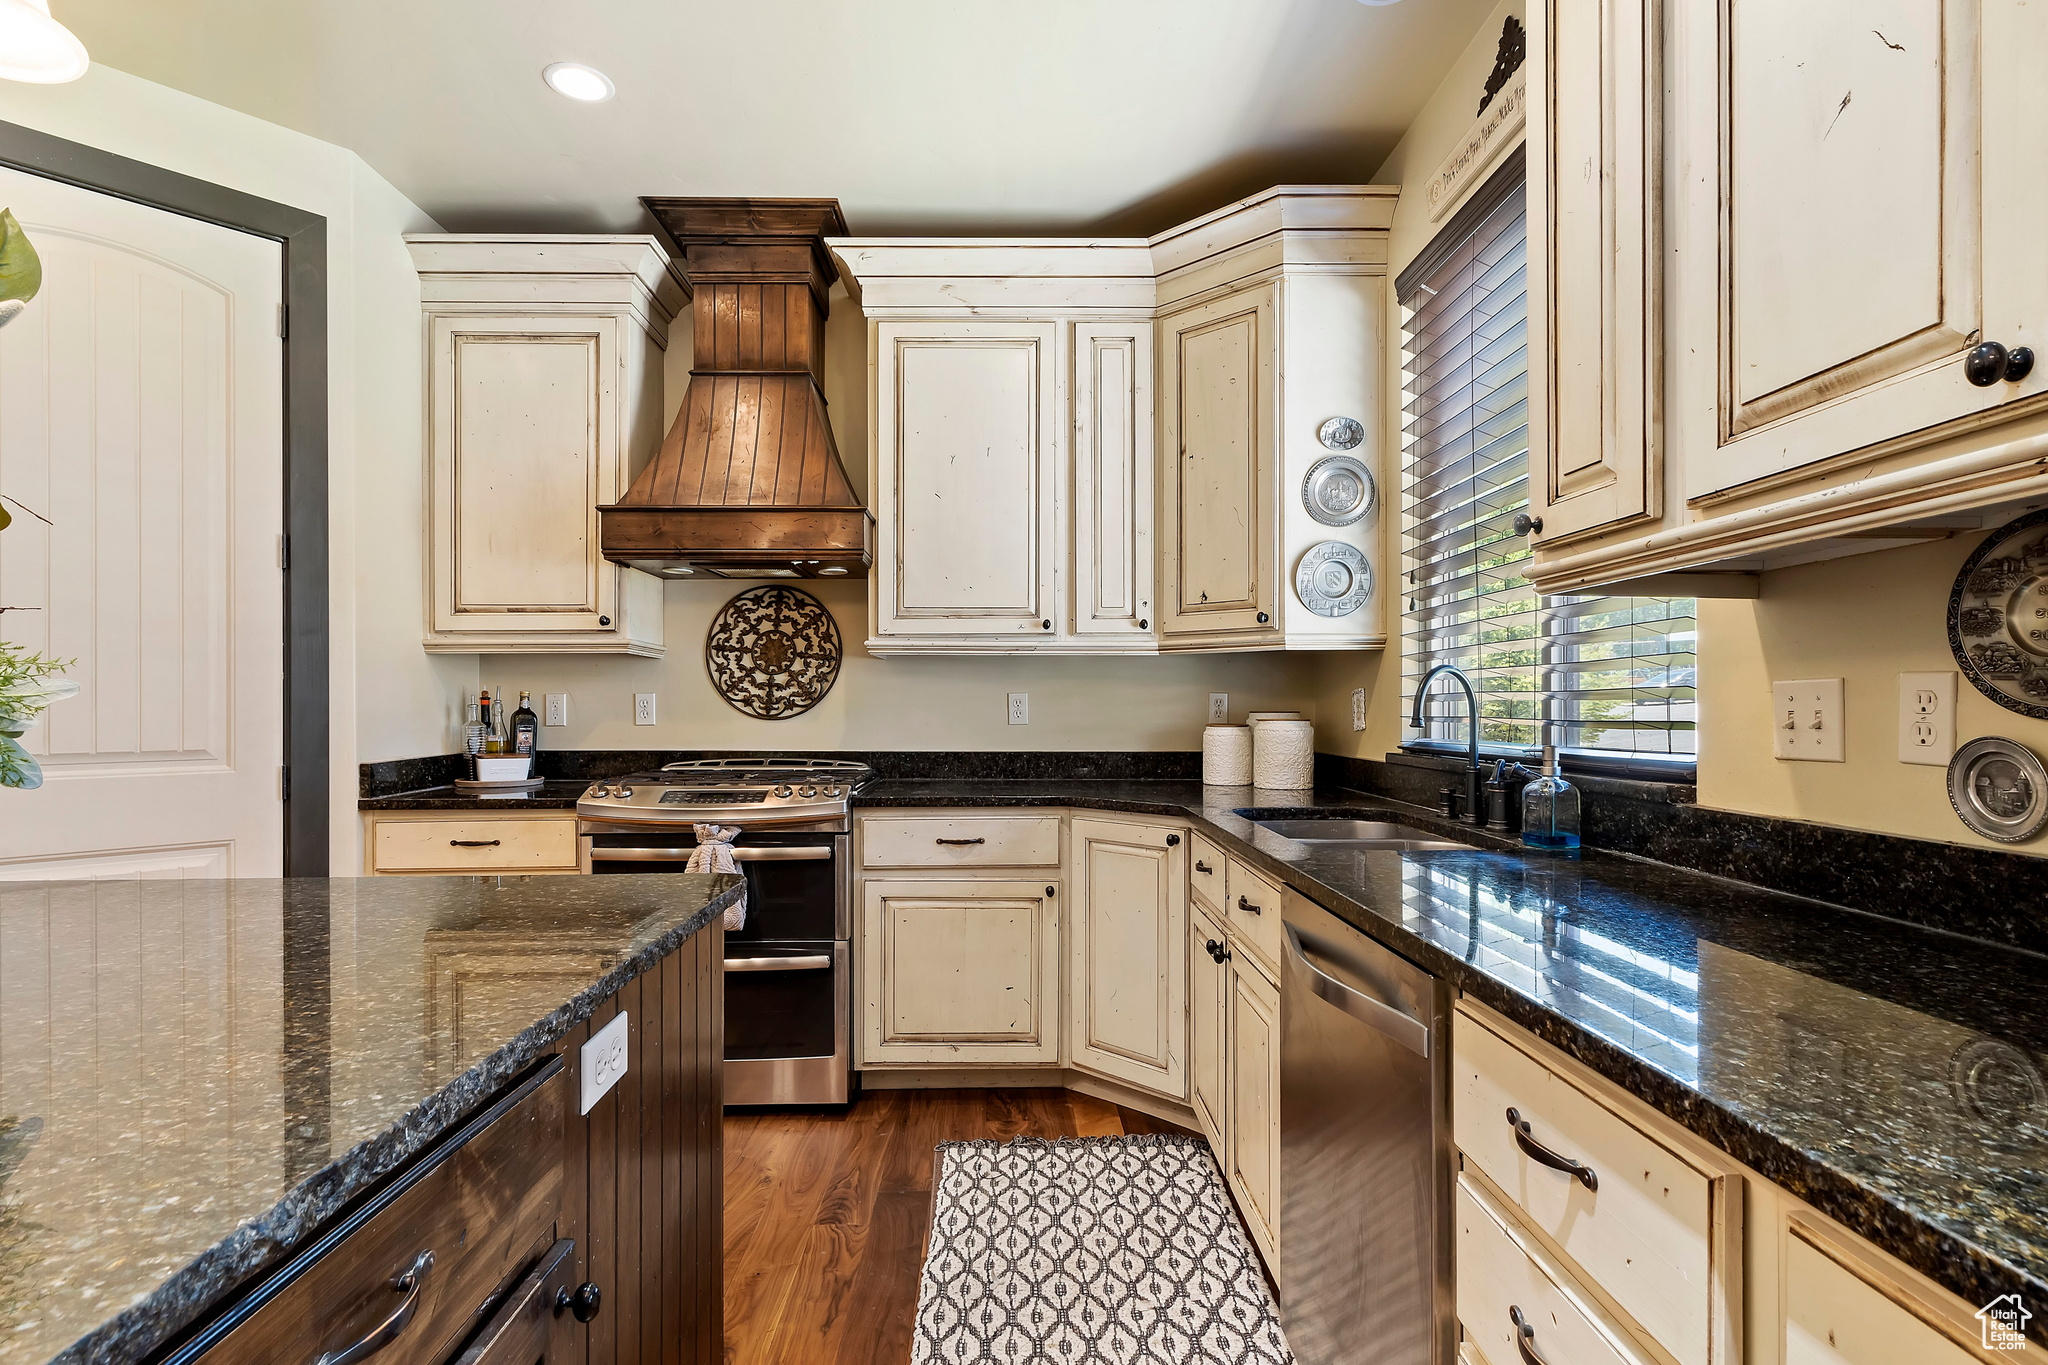 Kitchen with custom range hood, appliances with stainless steel finishes, dark stone counters, and sink